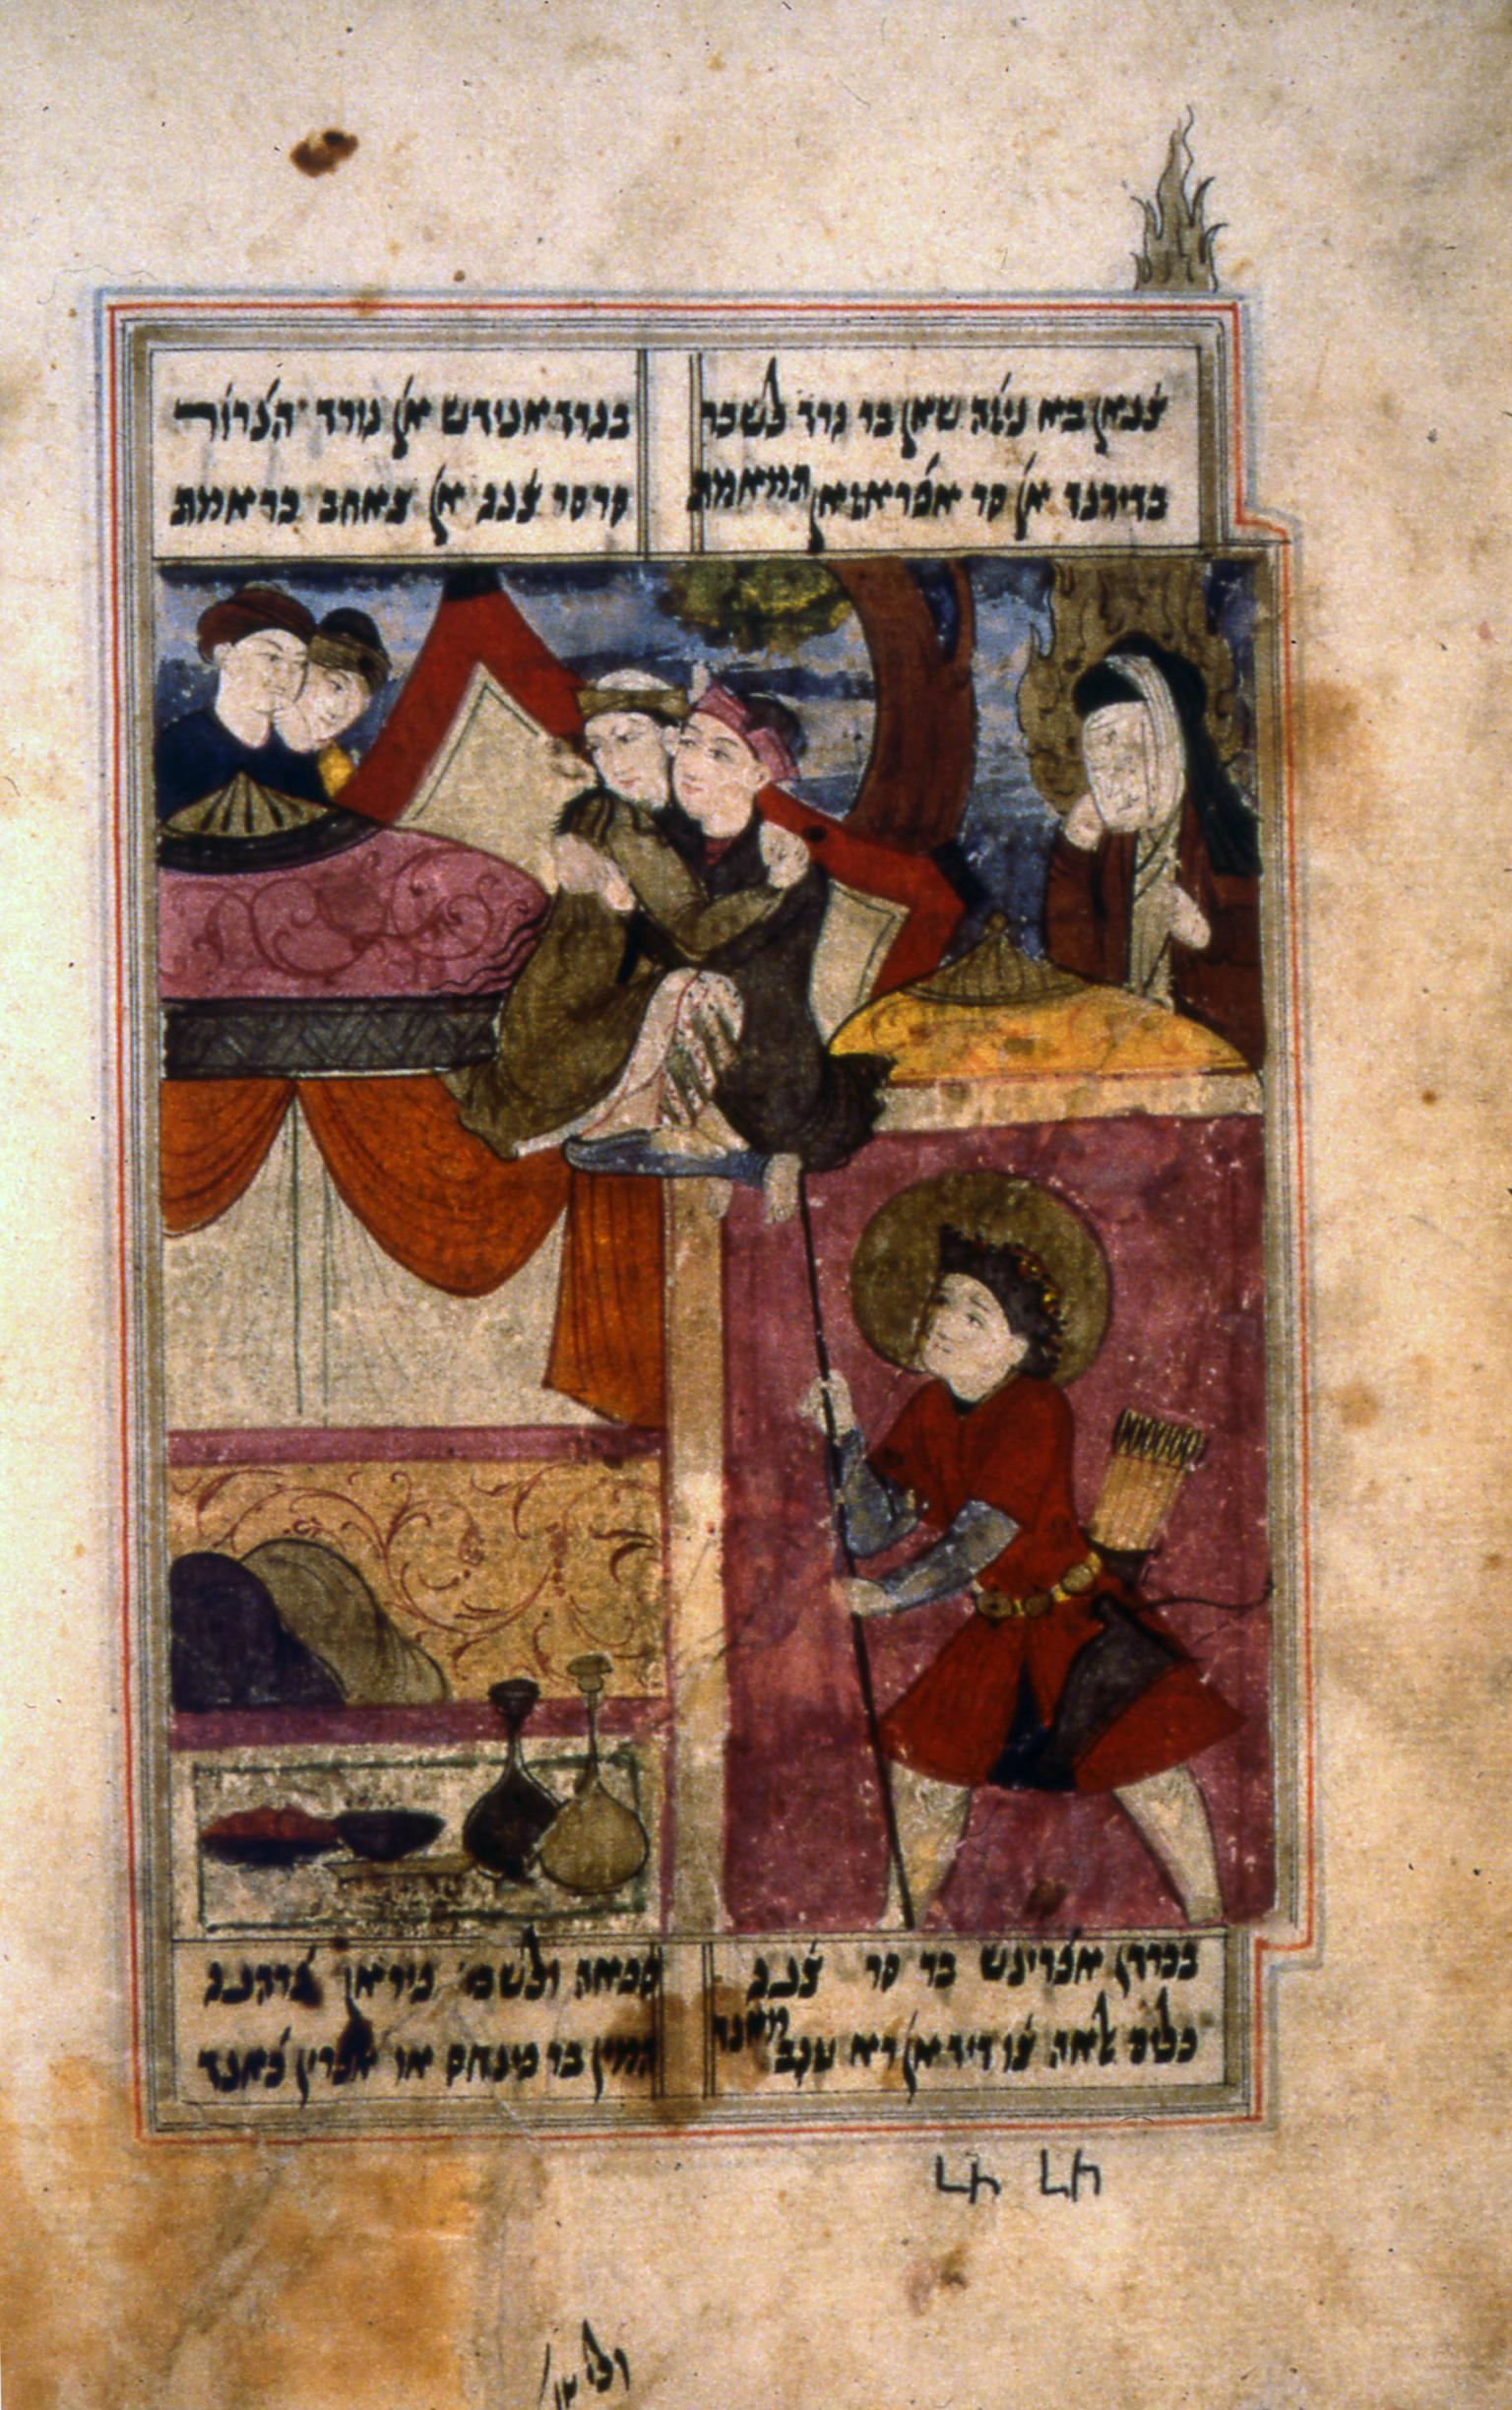 Manuscript page with illustration of two figures embracing in center, surrounded by two figures watching, another watching with face covered, another prodding them from underneath, and an image of a room, with Judeo-Persian text on top and bottom of page.